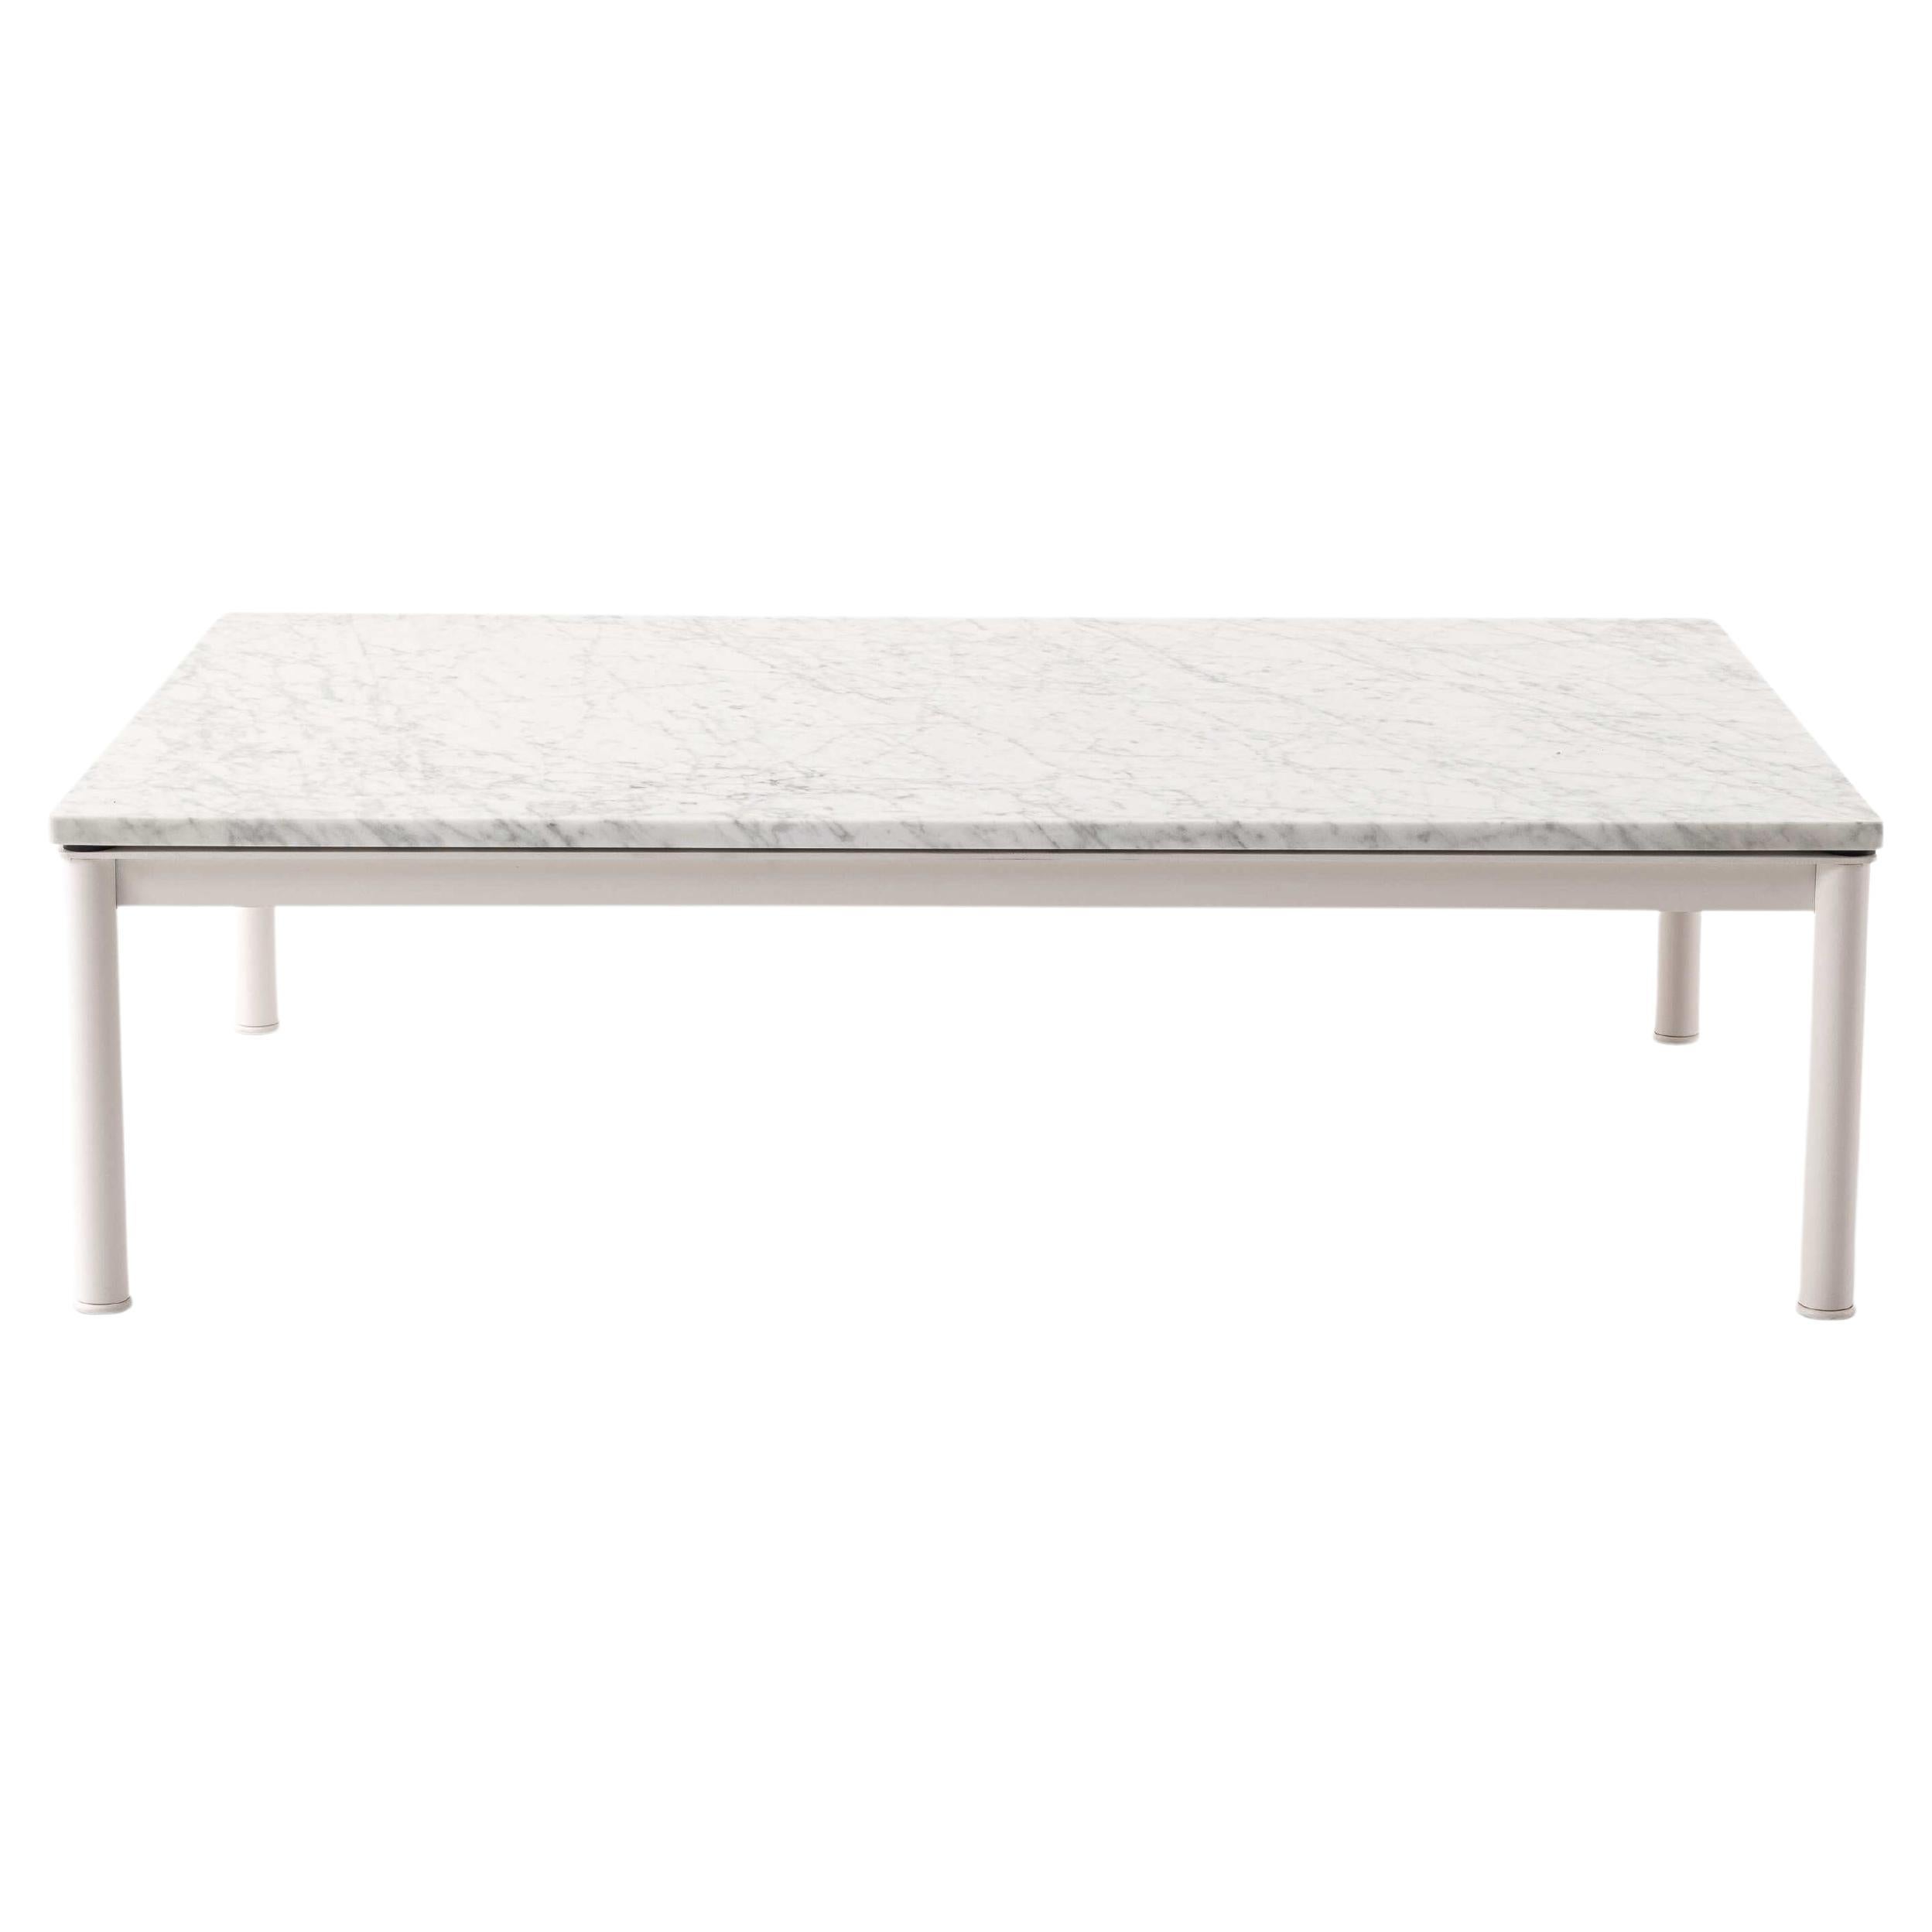 Le Corbusier, Pierre Jeanneret, Charlotte Perriand Lc10 Ivory Table by Cassina For Sale